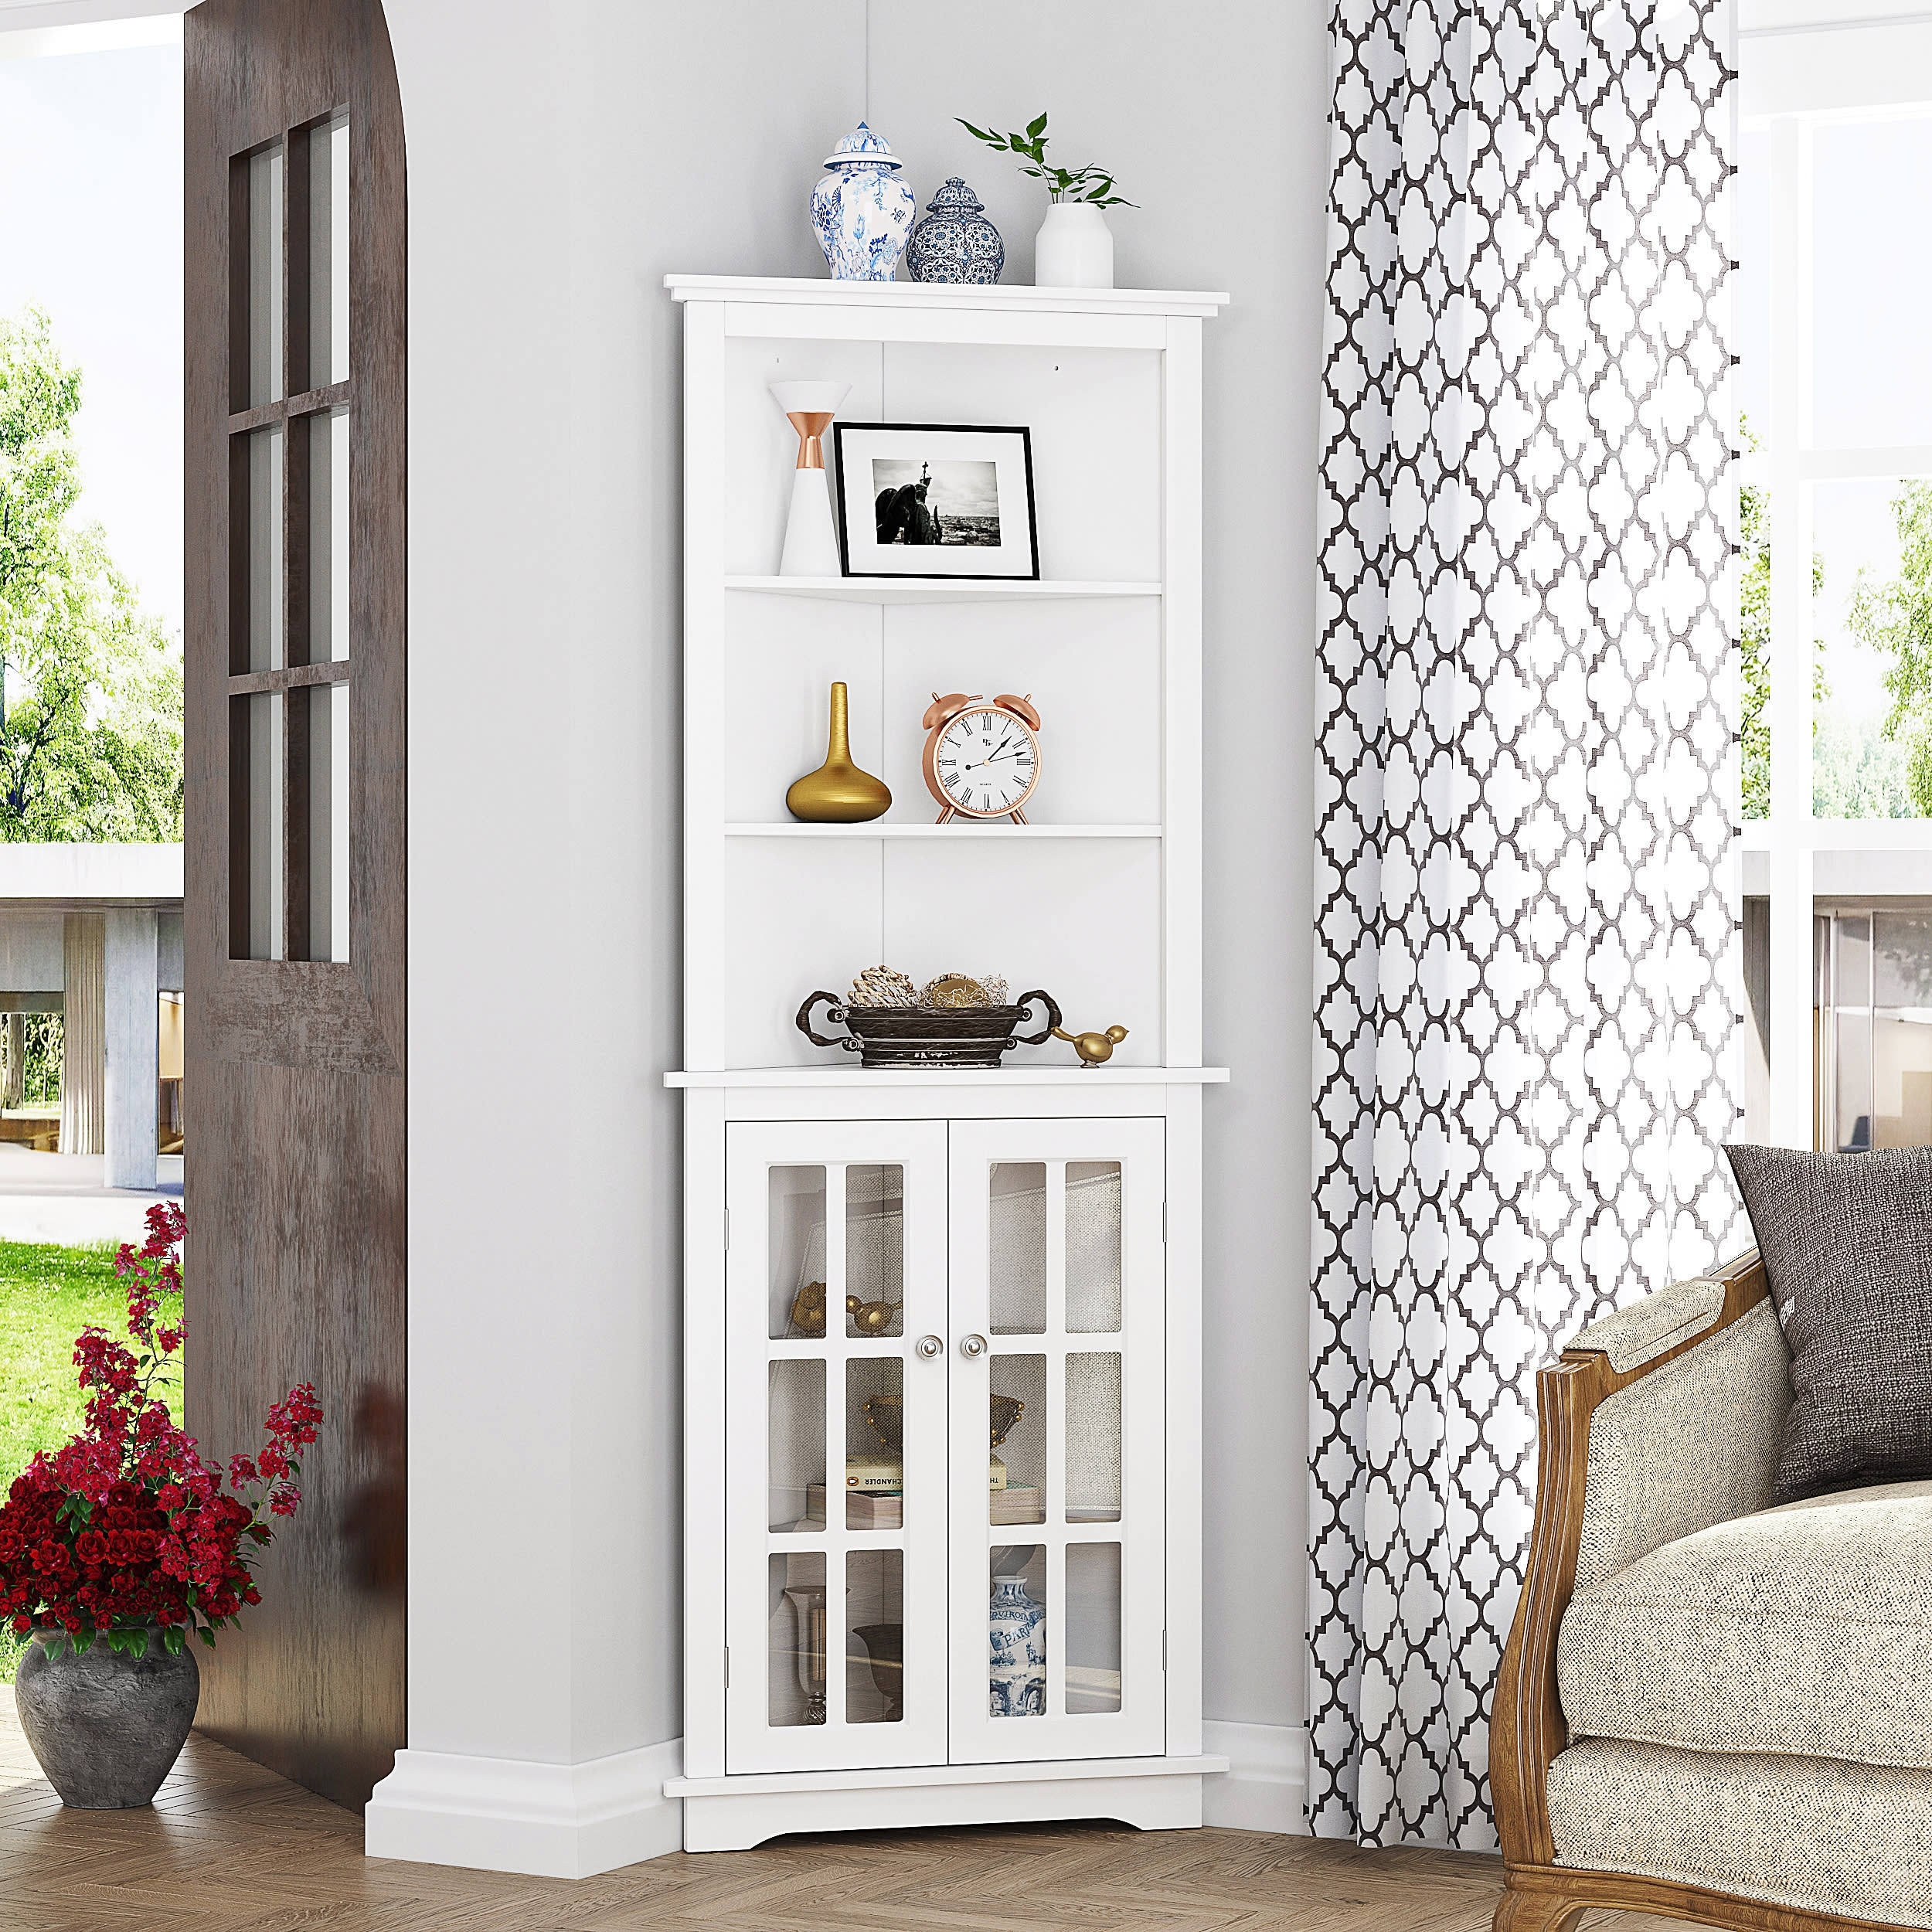 https://ak1.ostkcdn.com/images/products/is/images/direct/7cf5b5ee397fda7397e4922220d0b634c05d0868/Spirich-Home-Bathroom-Tall-Corner-Storage-Cabinet%2C-Floor-Slim-Display-with-Glass-Doors-and-Adjustable-Shelves-White.jpg